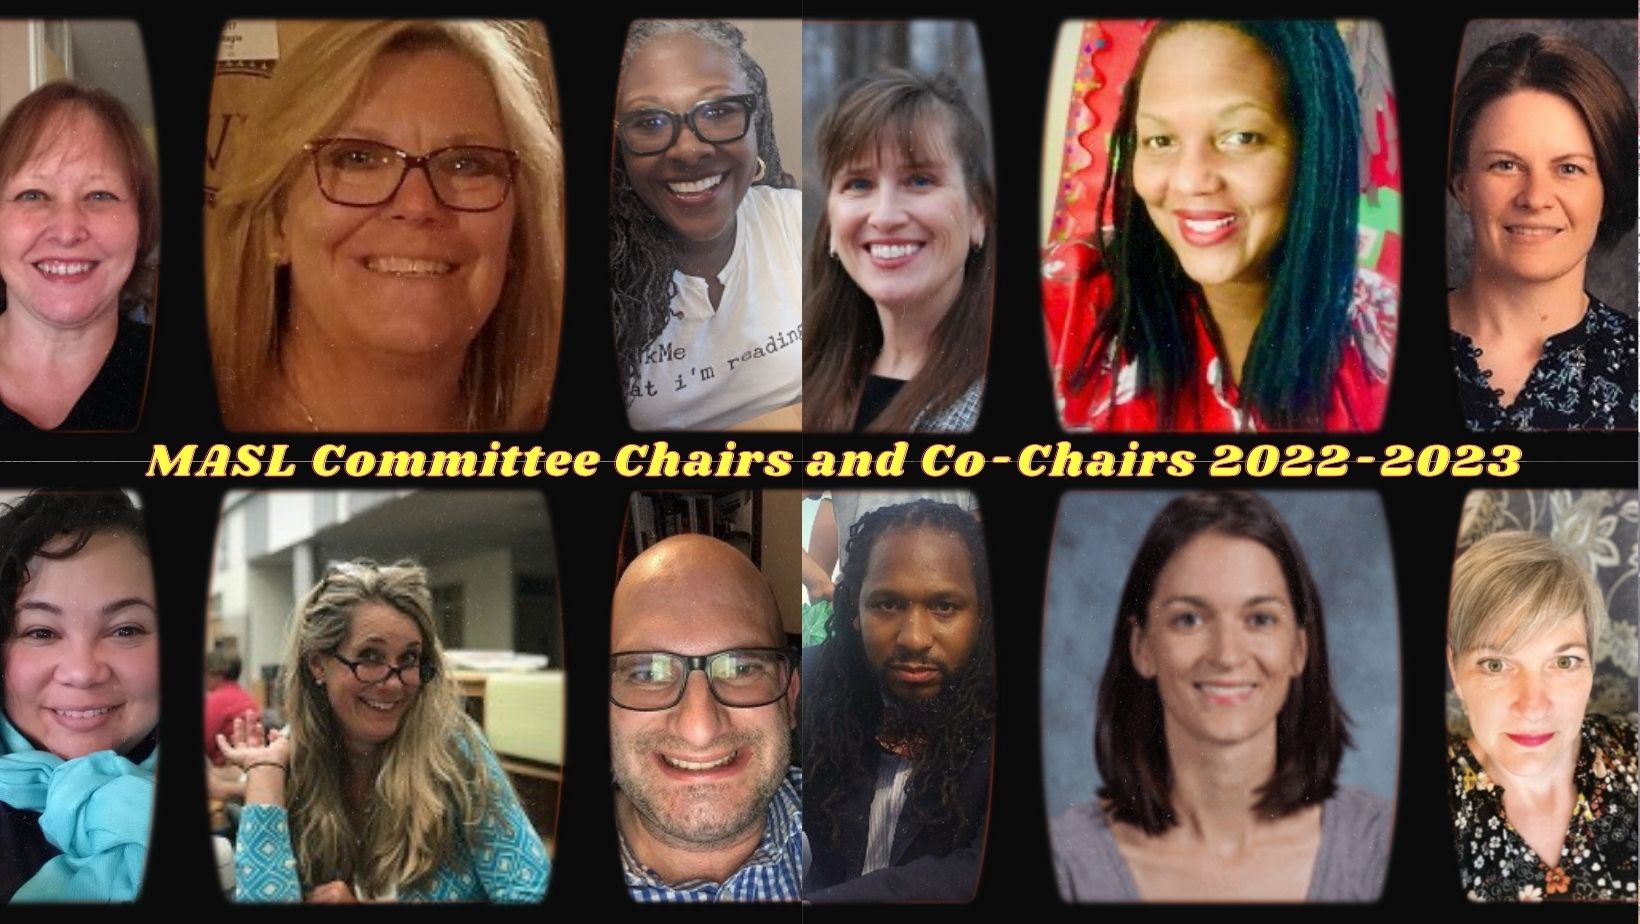 Collage of MASL committee chairs for 2022-2023